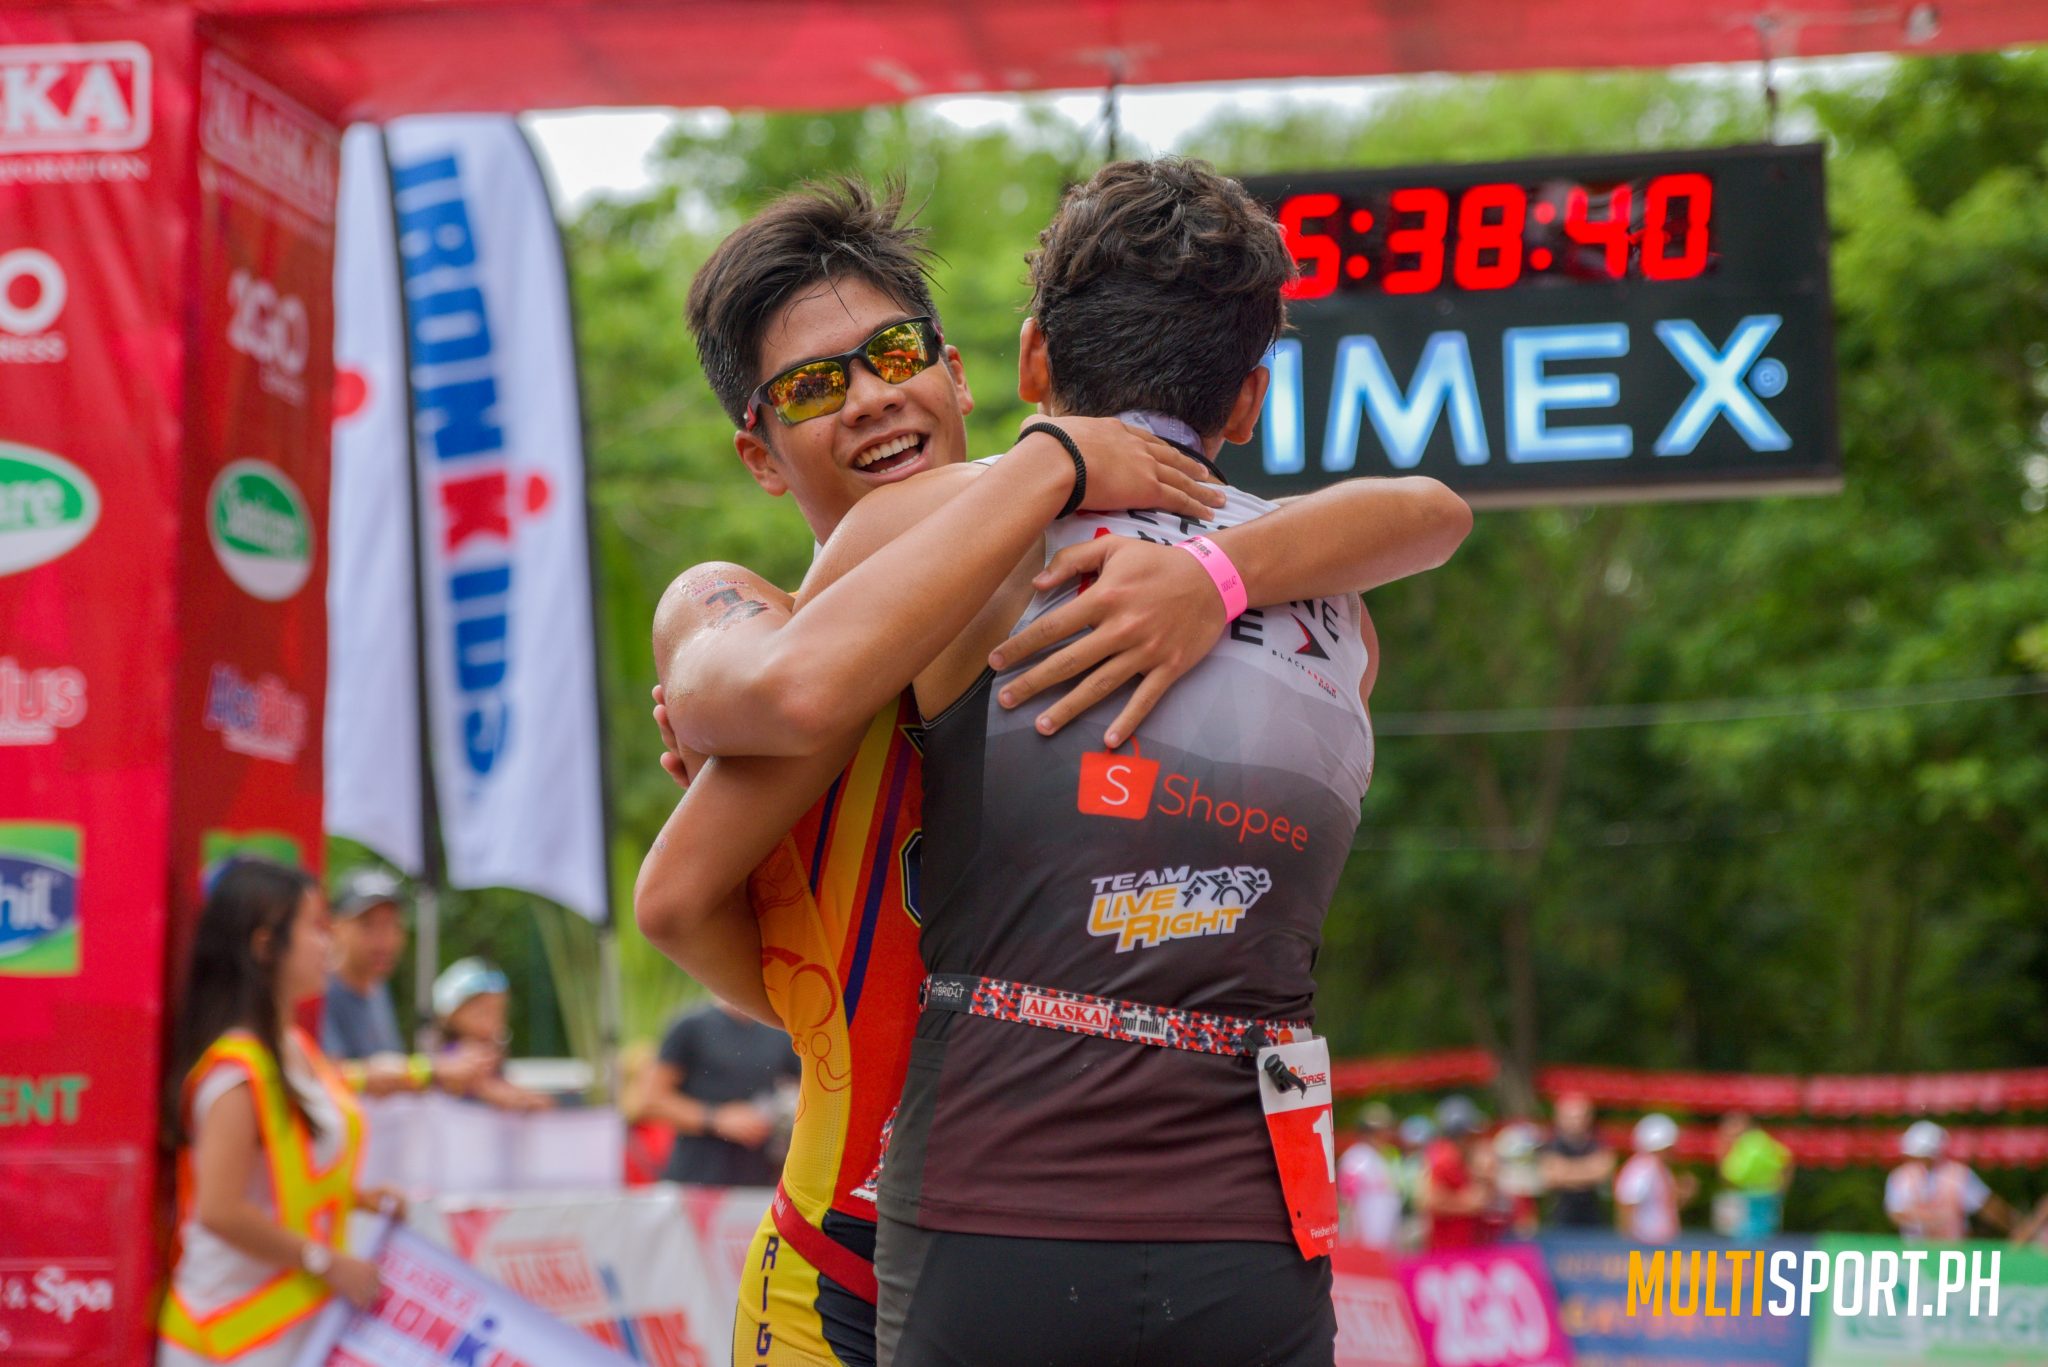 While Zedrick Borja was ahead by at least a minute during T1, the race’s entirety found him and fellow IronKid Clifford Pusing in a close fight